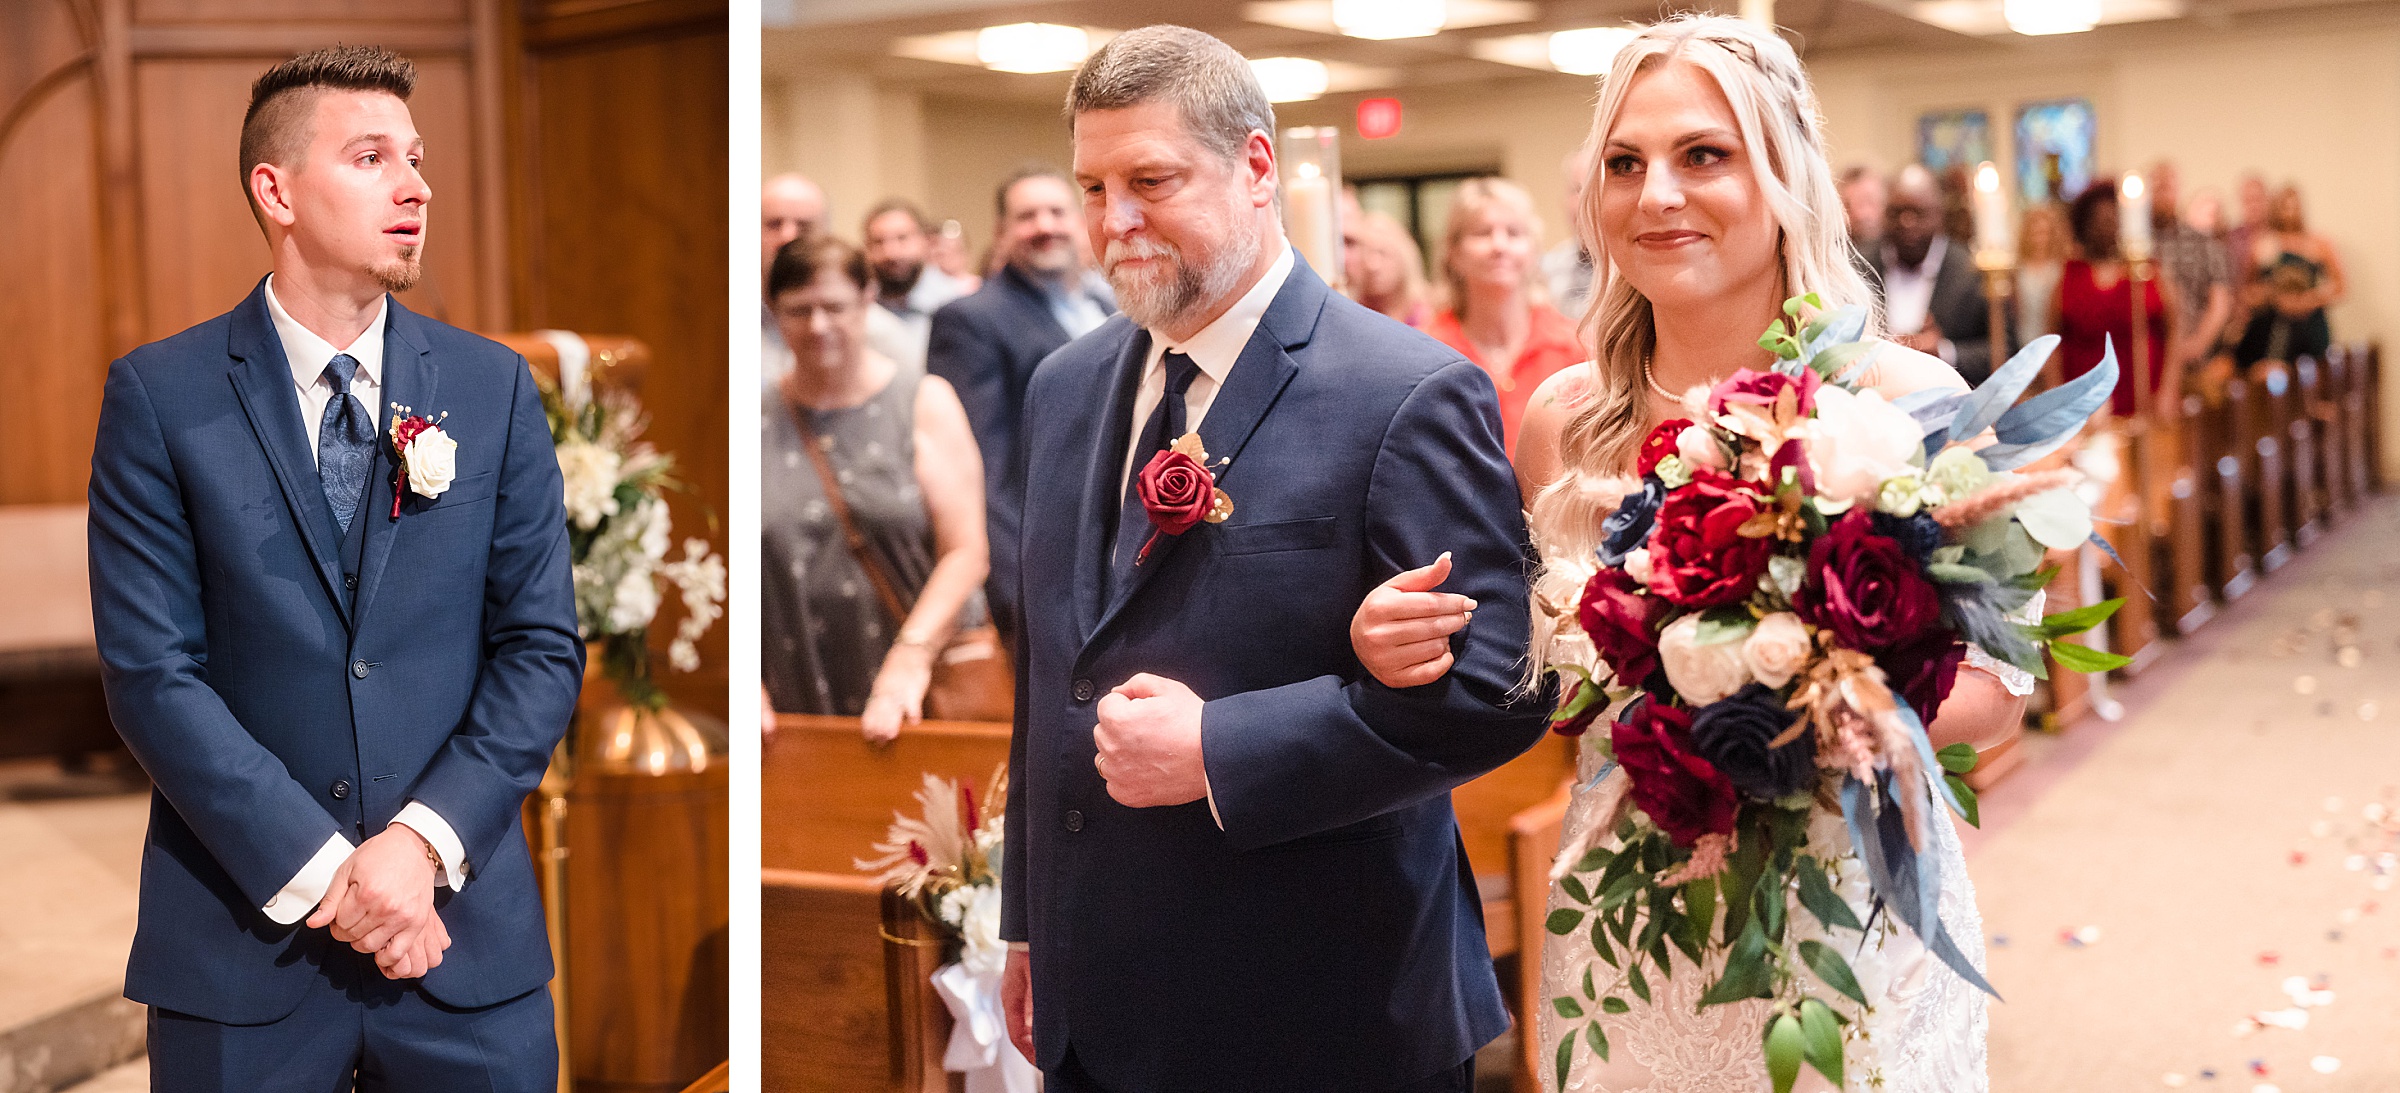 Dad walks the bride down the aisle during her wedding at the First United Methodist Church in Peoria, Illinois